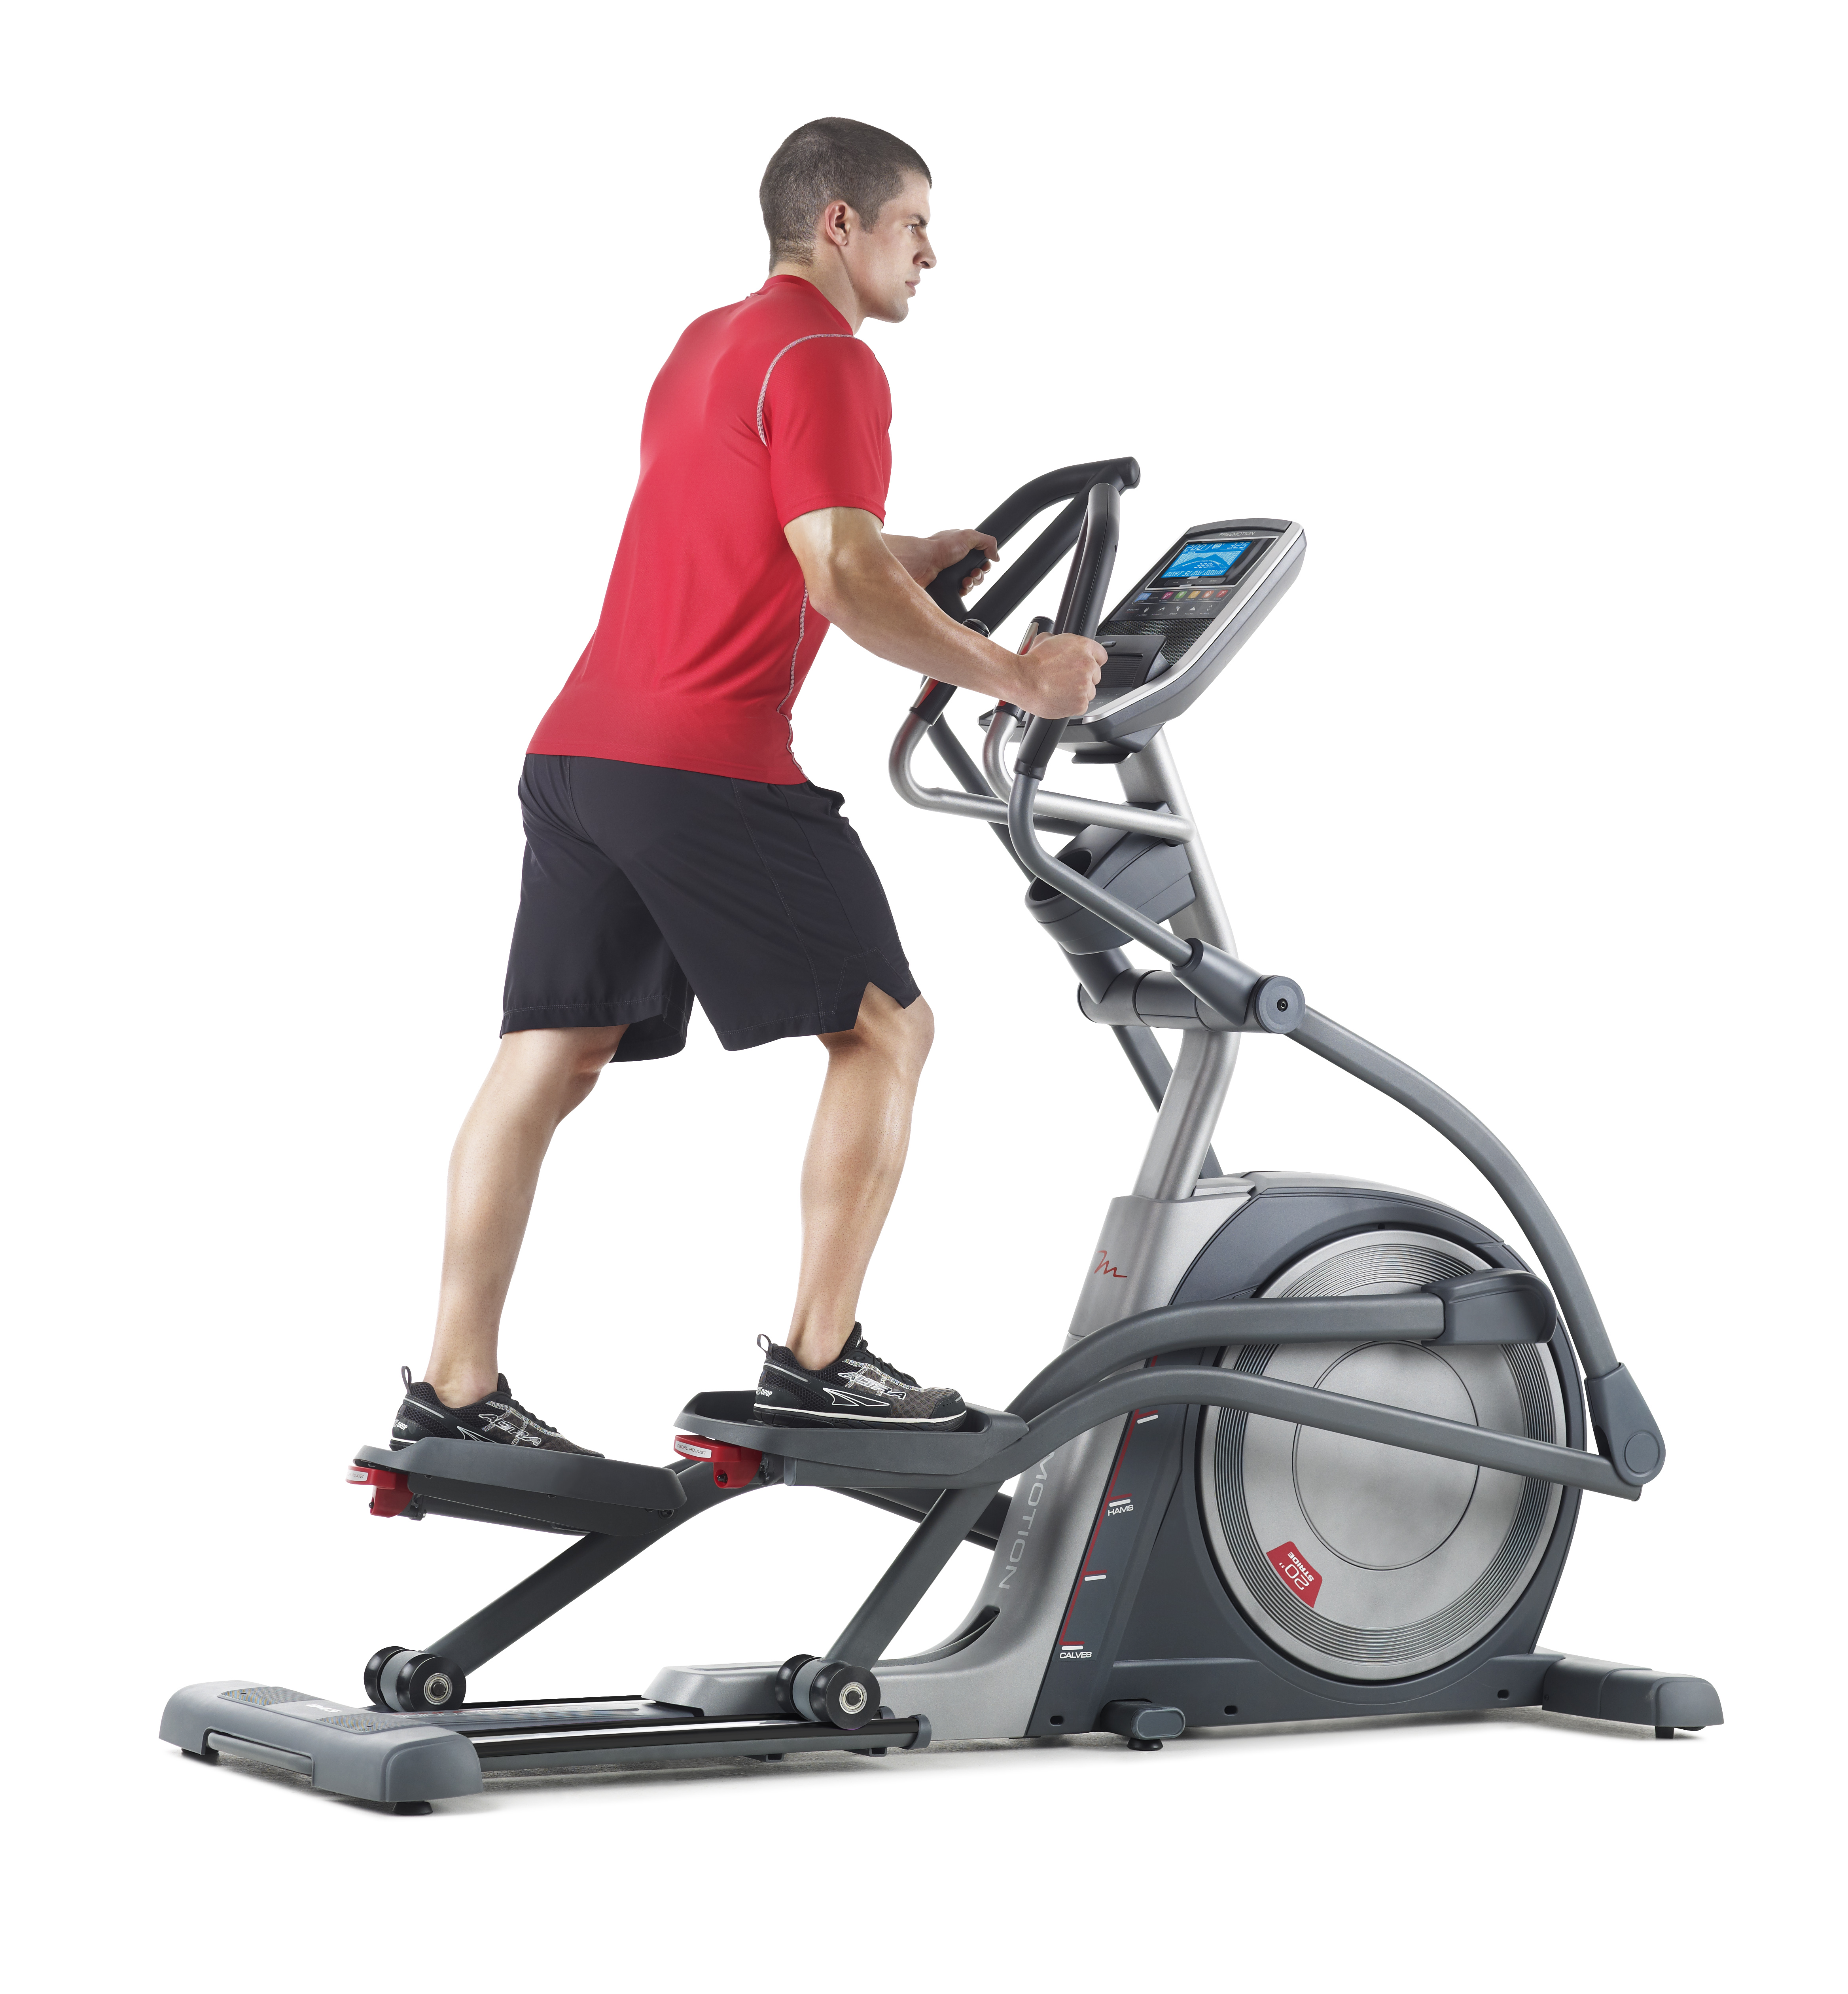 Freemotion 645 Commercial Grade Elliptical with Adjustable Incline - image 5 of 6